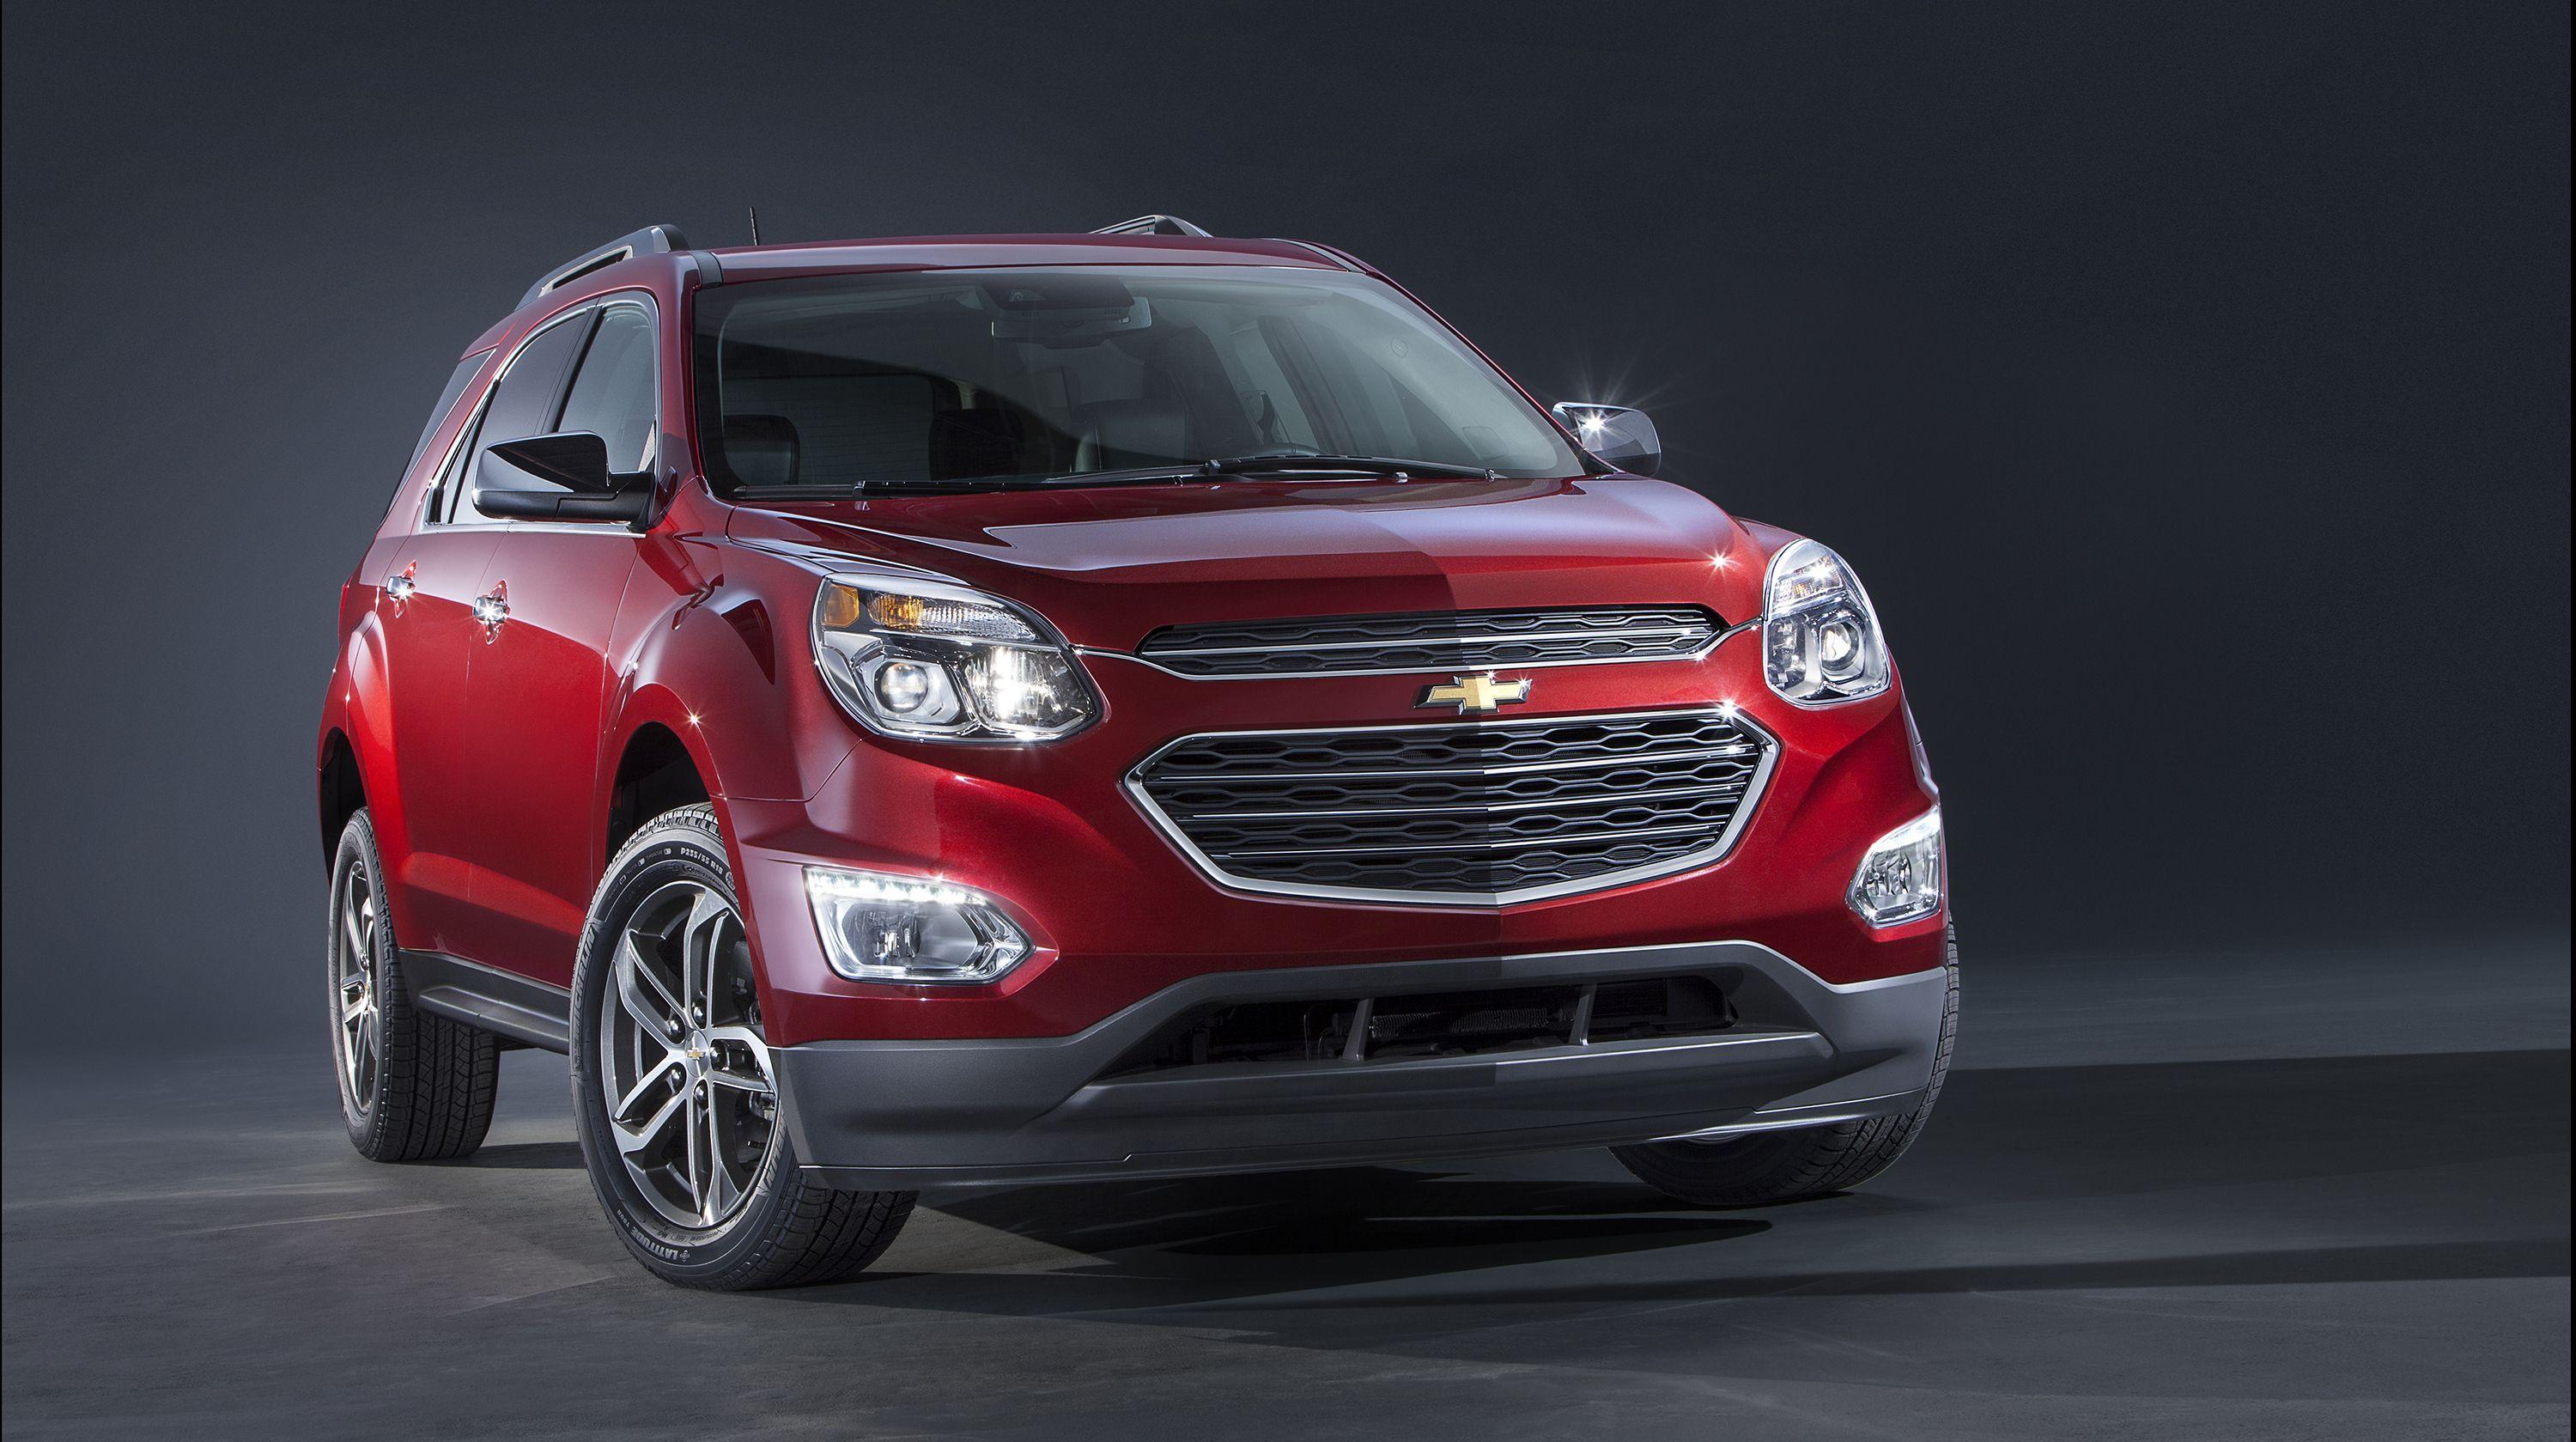 Fresh Face: Chevrolet Introduces Restyled 2016 Equinox